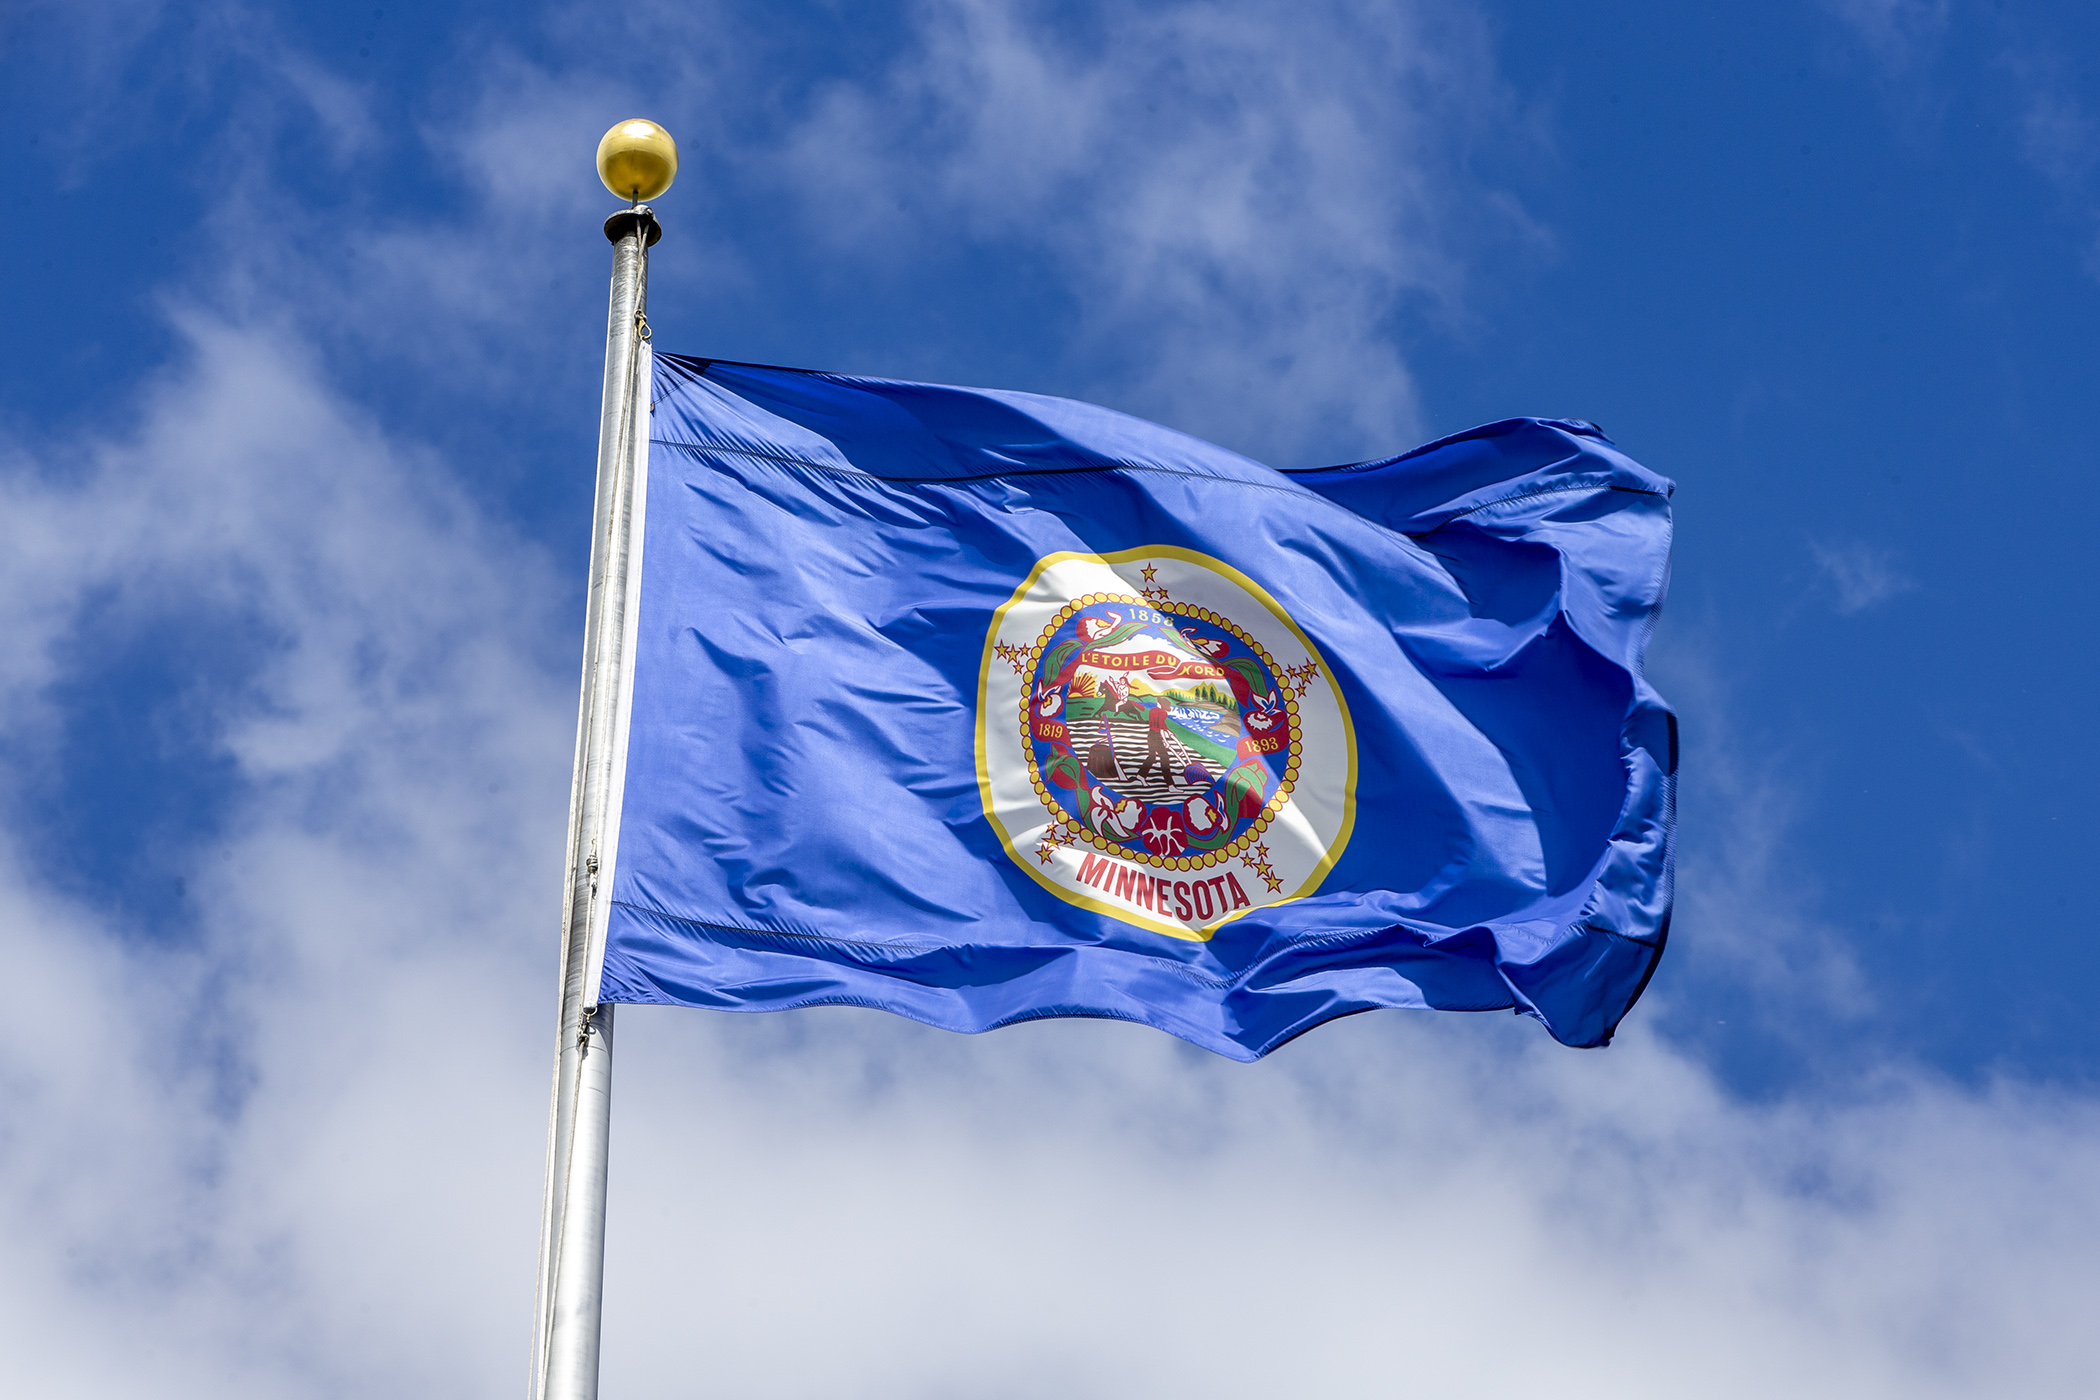 HF284 calls for a State Emblems Redesign Commission to develop, design and recommend a new state flag and state seal. (House Photography file photo)